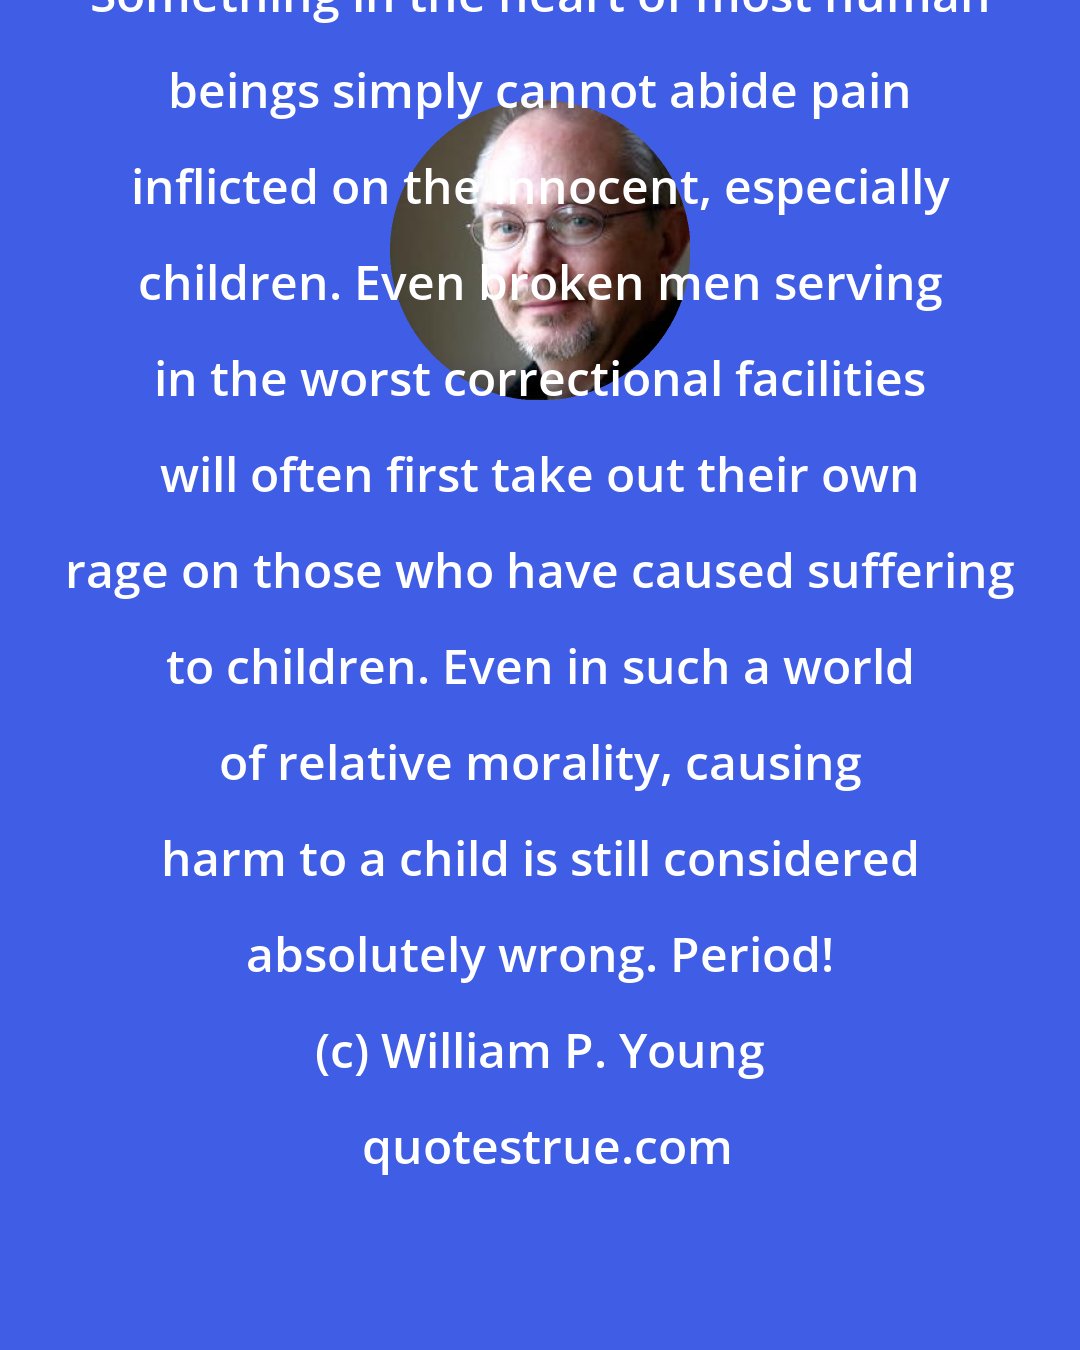 William P. Young: Something in the heart of most human beings simply cannot abide pain inflicted on the innocent, especially children. Even broken men serving in the worst correctional facilities will often first take out their own rage on those who have caused suffering to children. Even in such a world of relative morality, causing harm to a child is still considered absolutely wrong. Period!